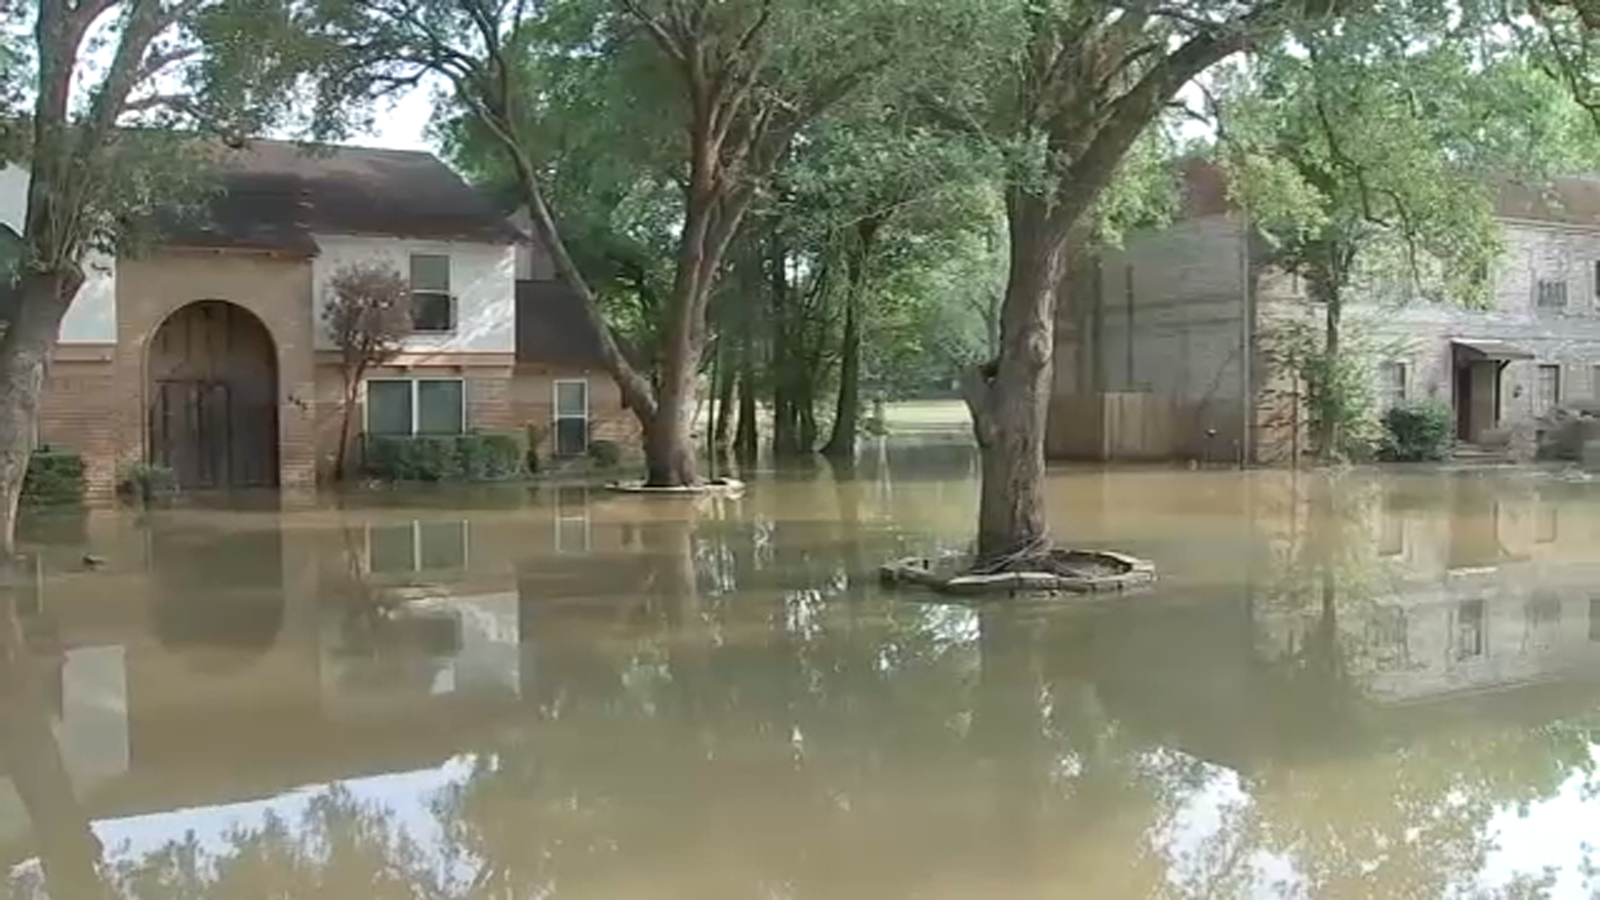 Flooding emergency: Clean up efforts are underway for Montgomery County while flood waters head into Channelview [Video]